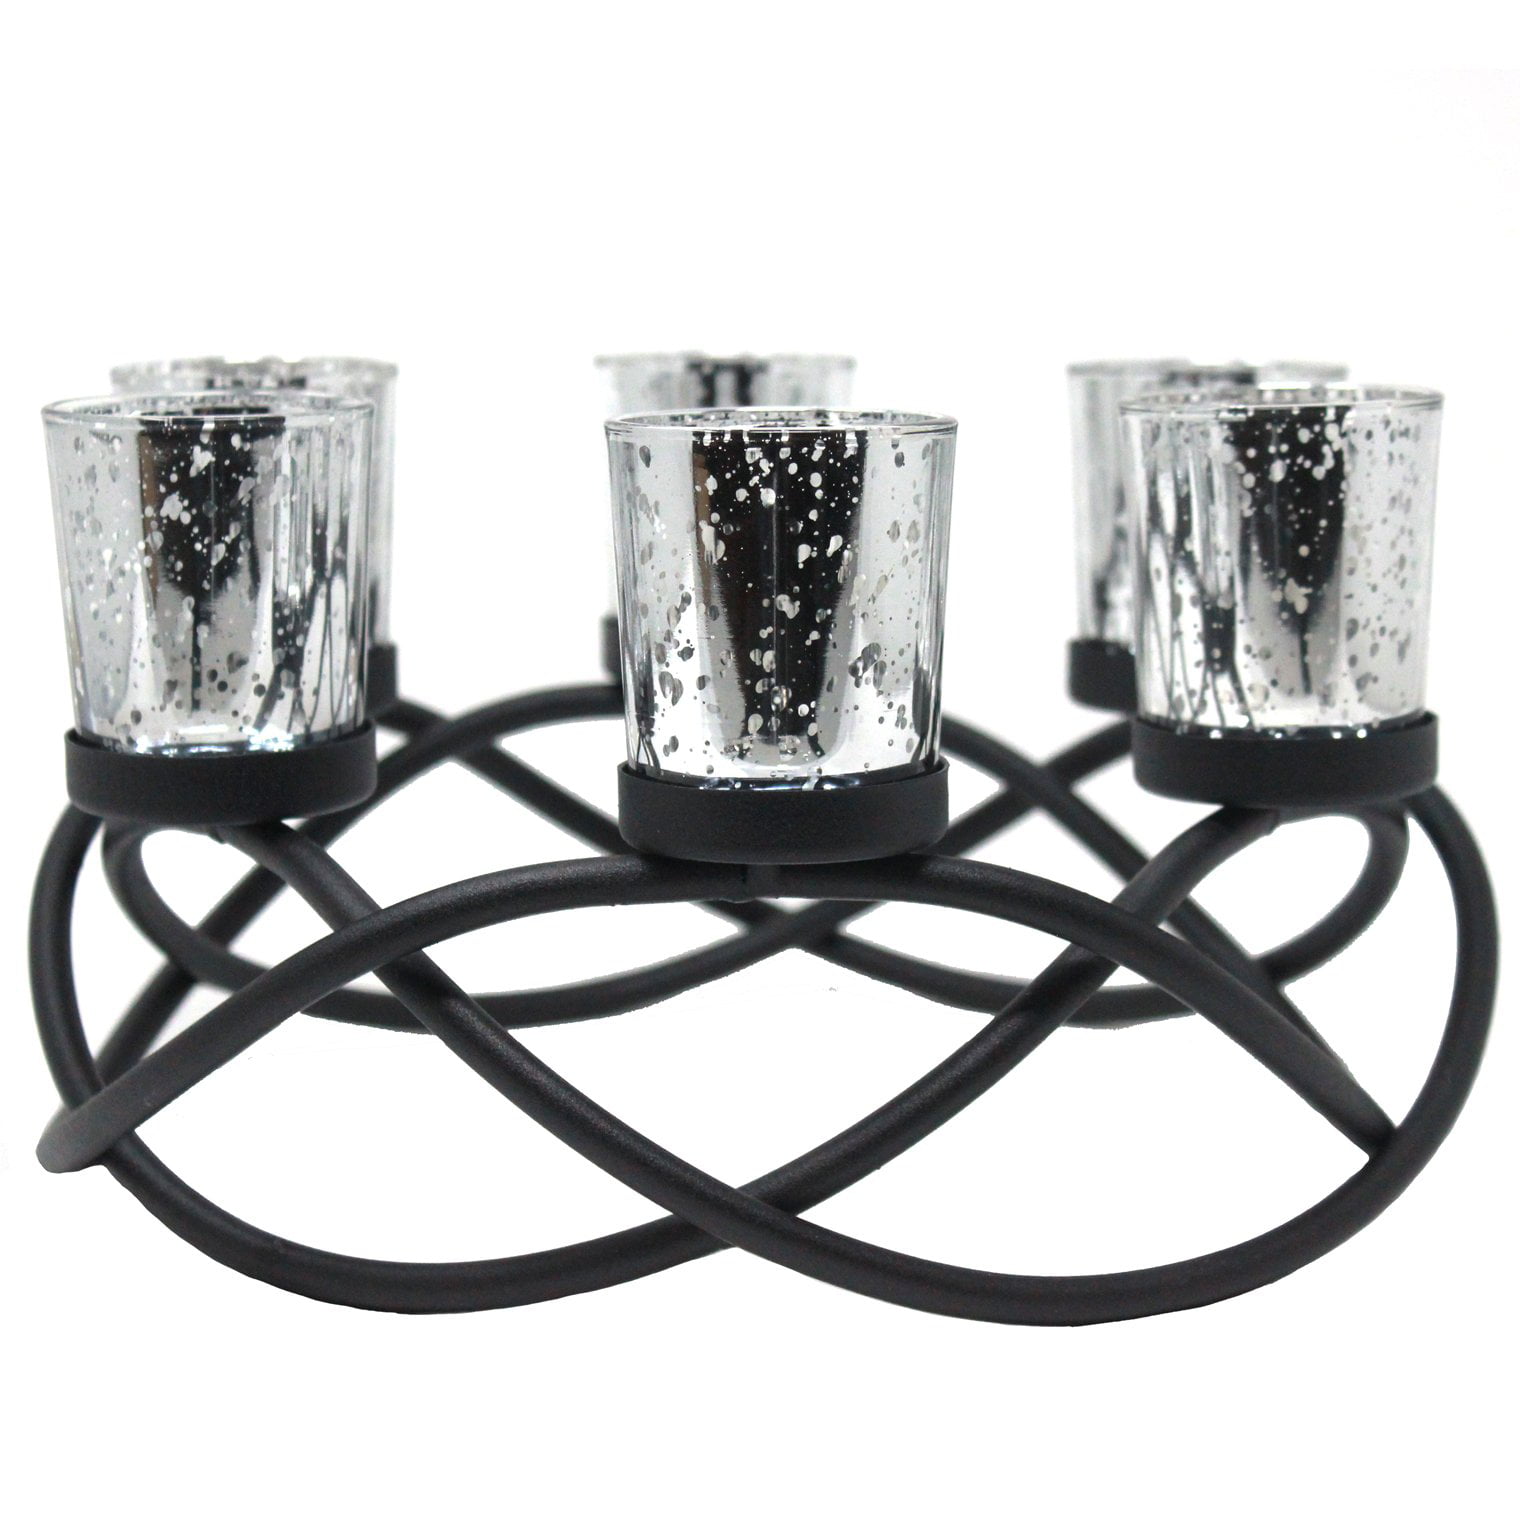 CIRCULAR 6 CANDLE CUPS STAND W/ GLASS VASE CANDLEHOLDER CENTERPIECE ** NIB 